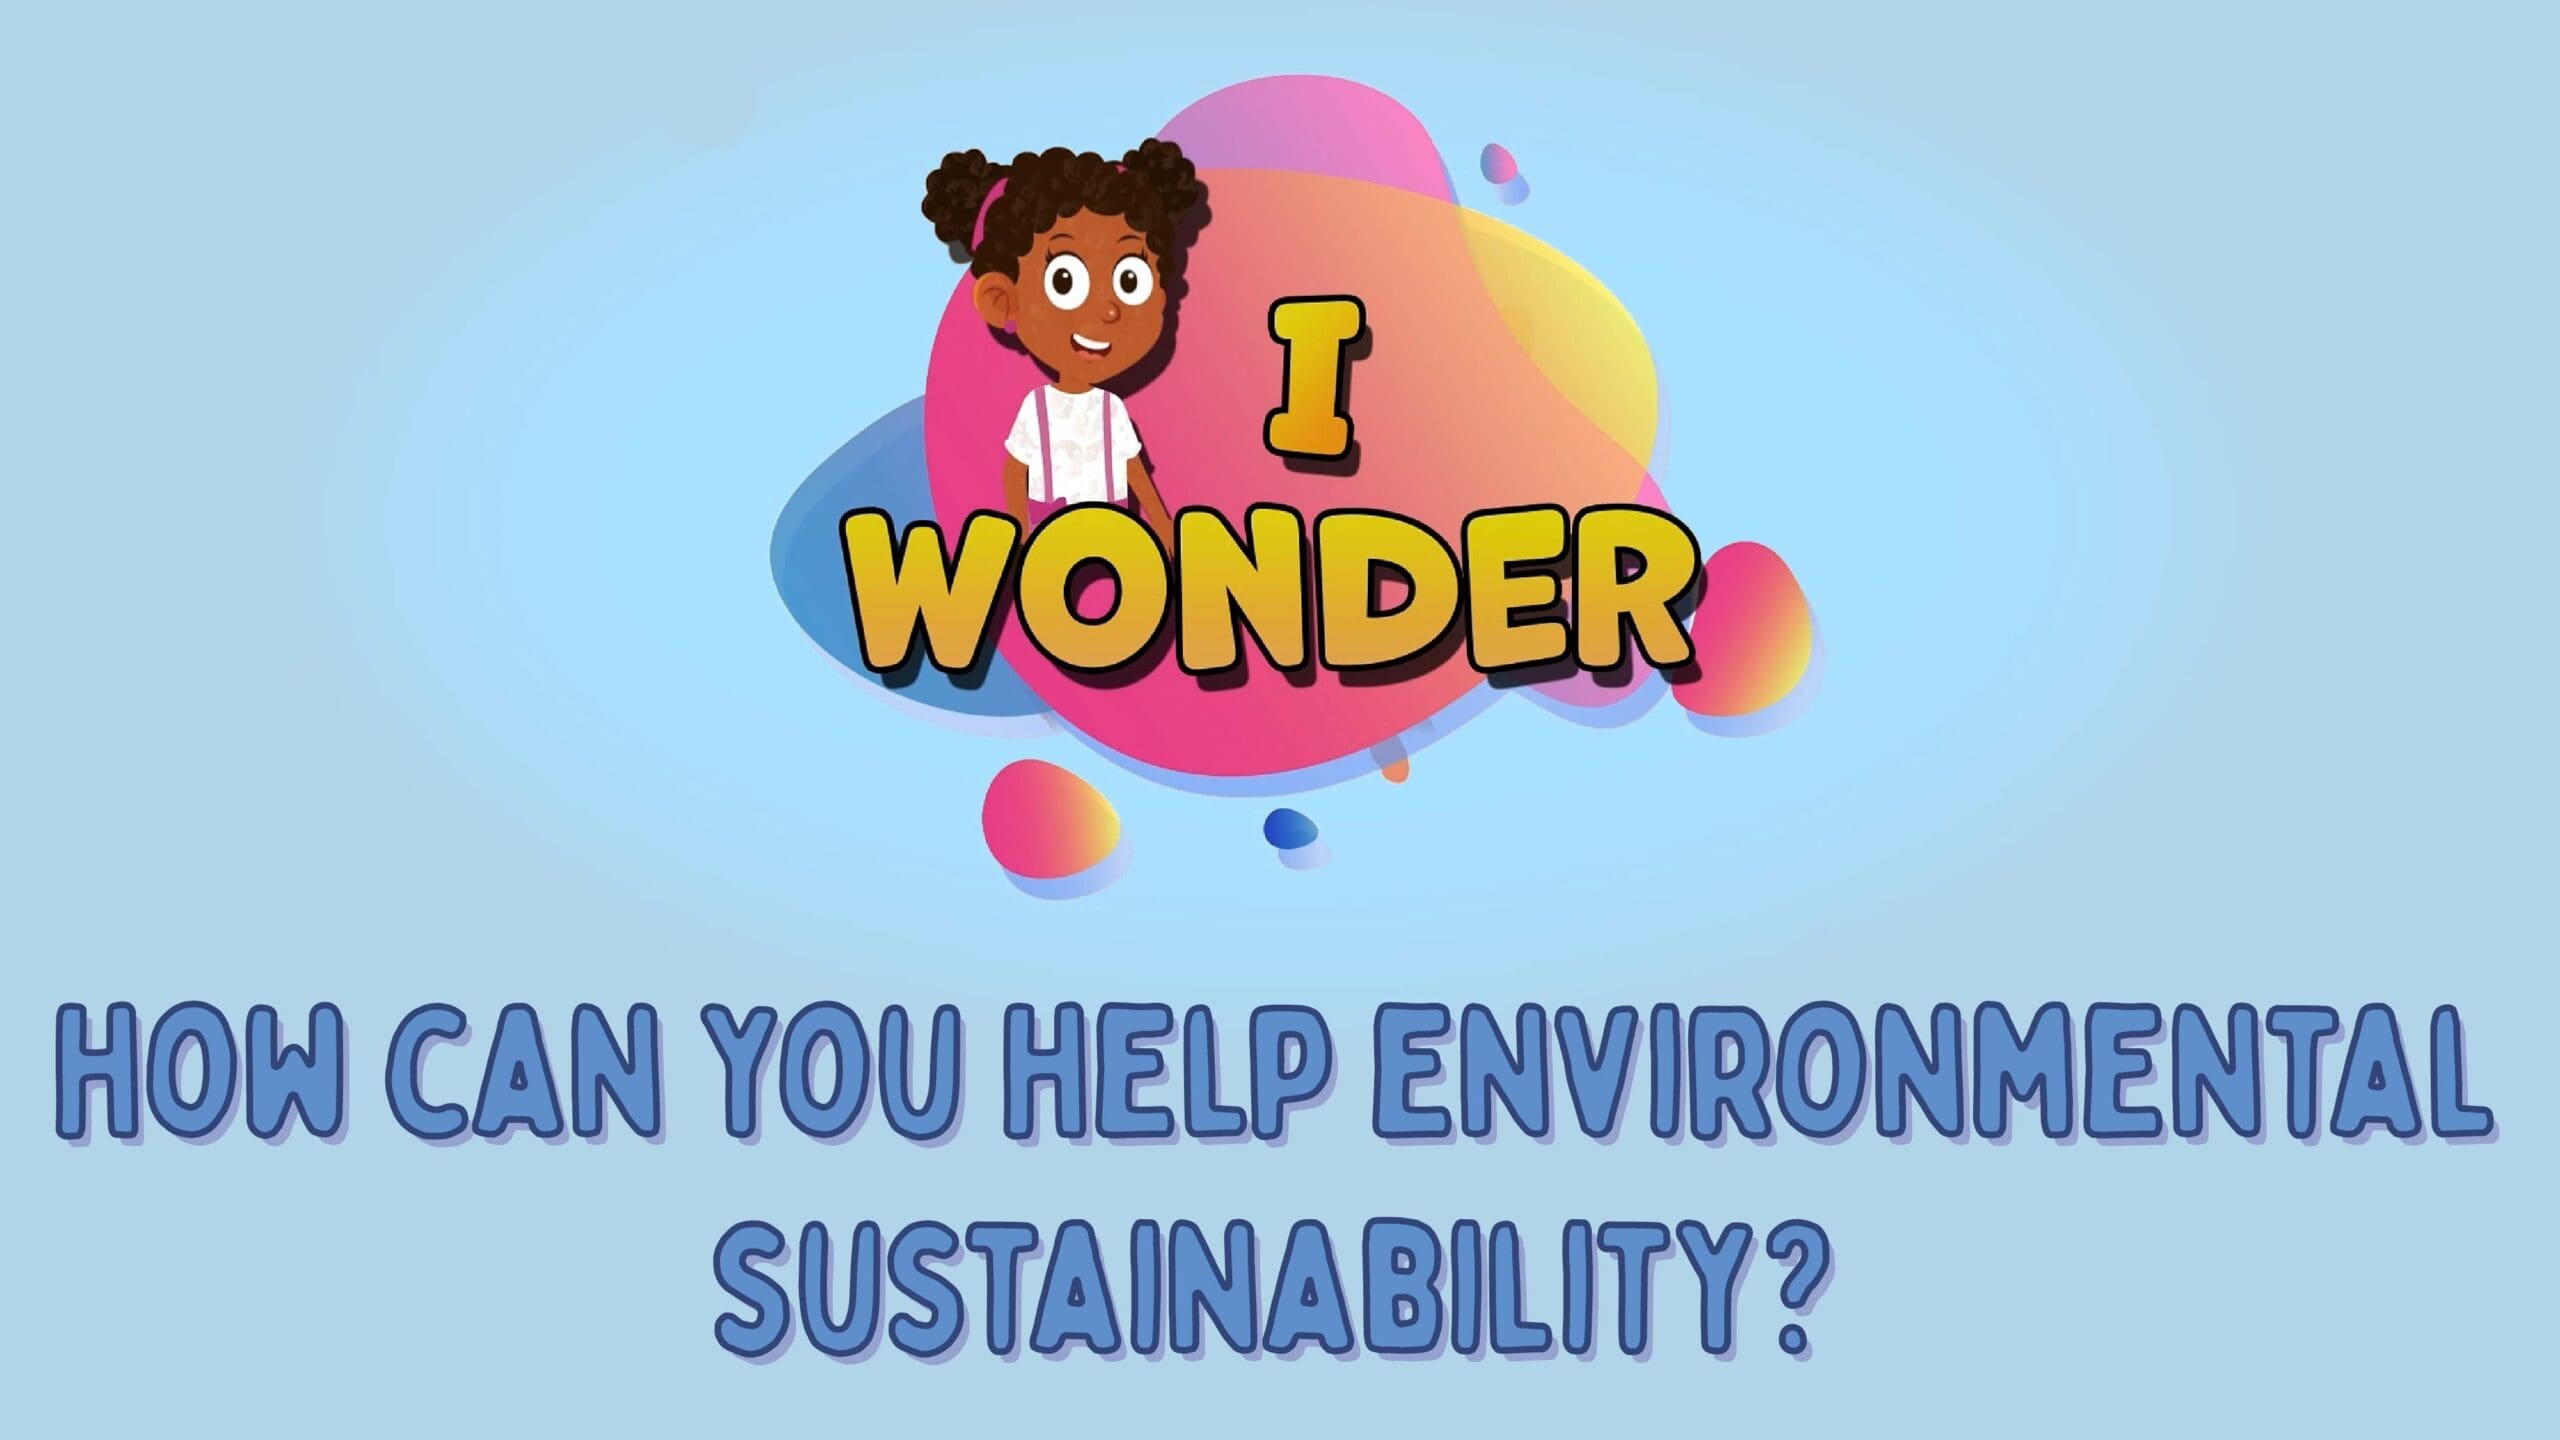 What Is Environmental Sustainability?